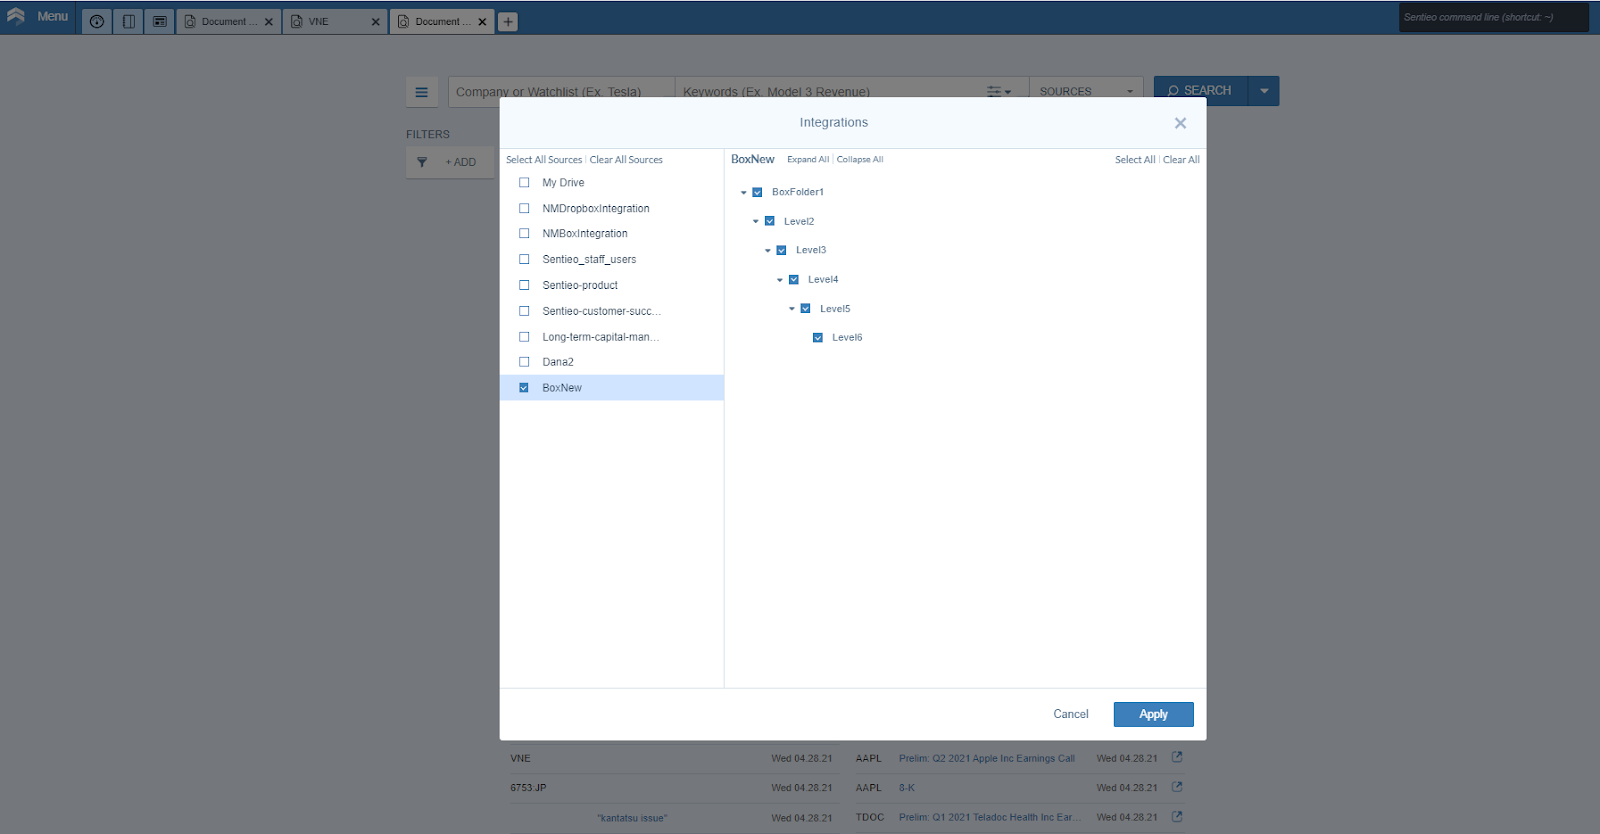 folder structure and documents become a source in Sentieo's Document Search